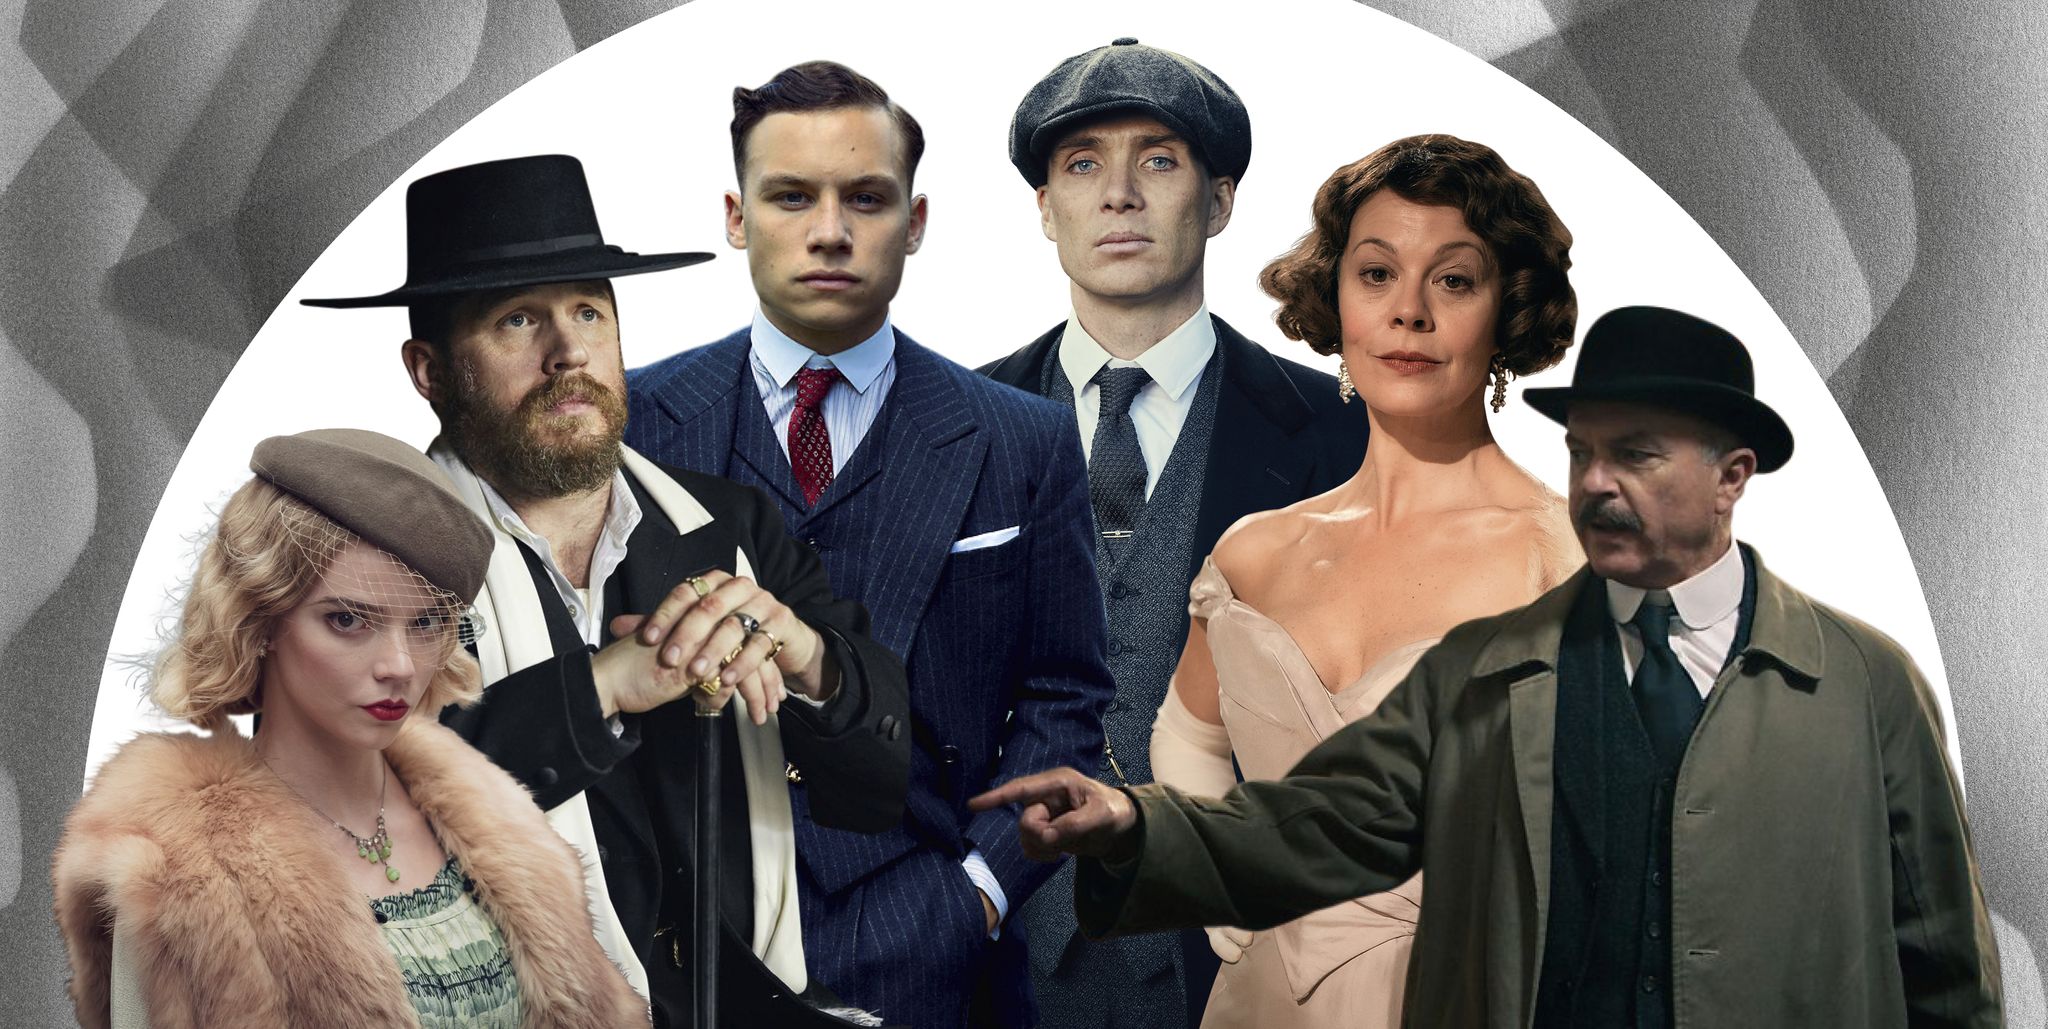 An Oral History Of Peaky Blinders As Told By Cillian Murphy The Cast And Crew 